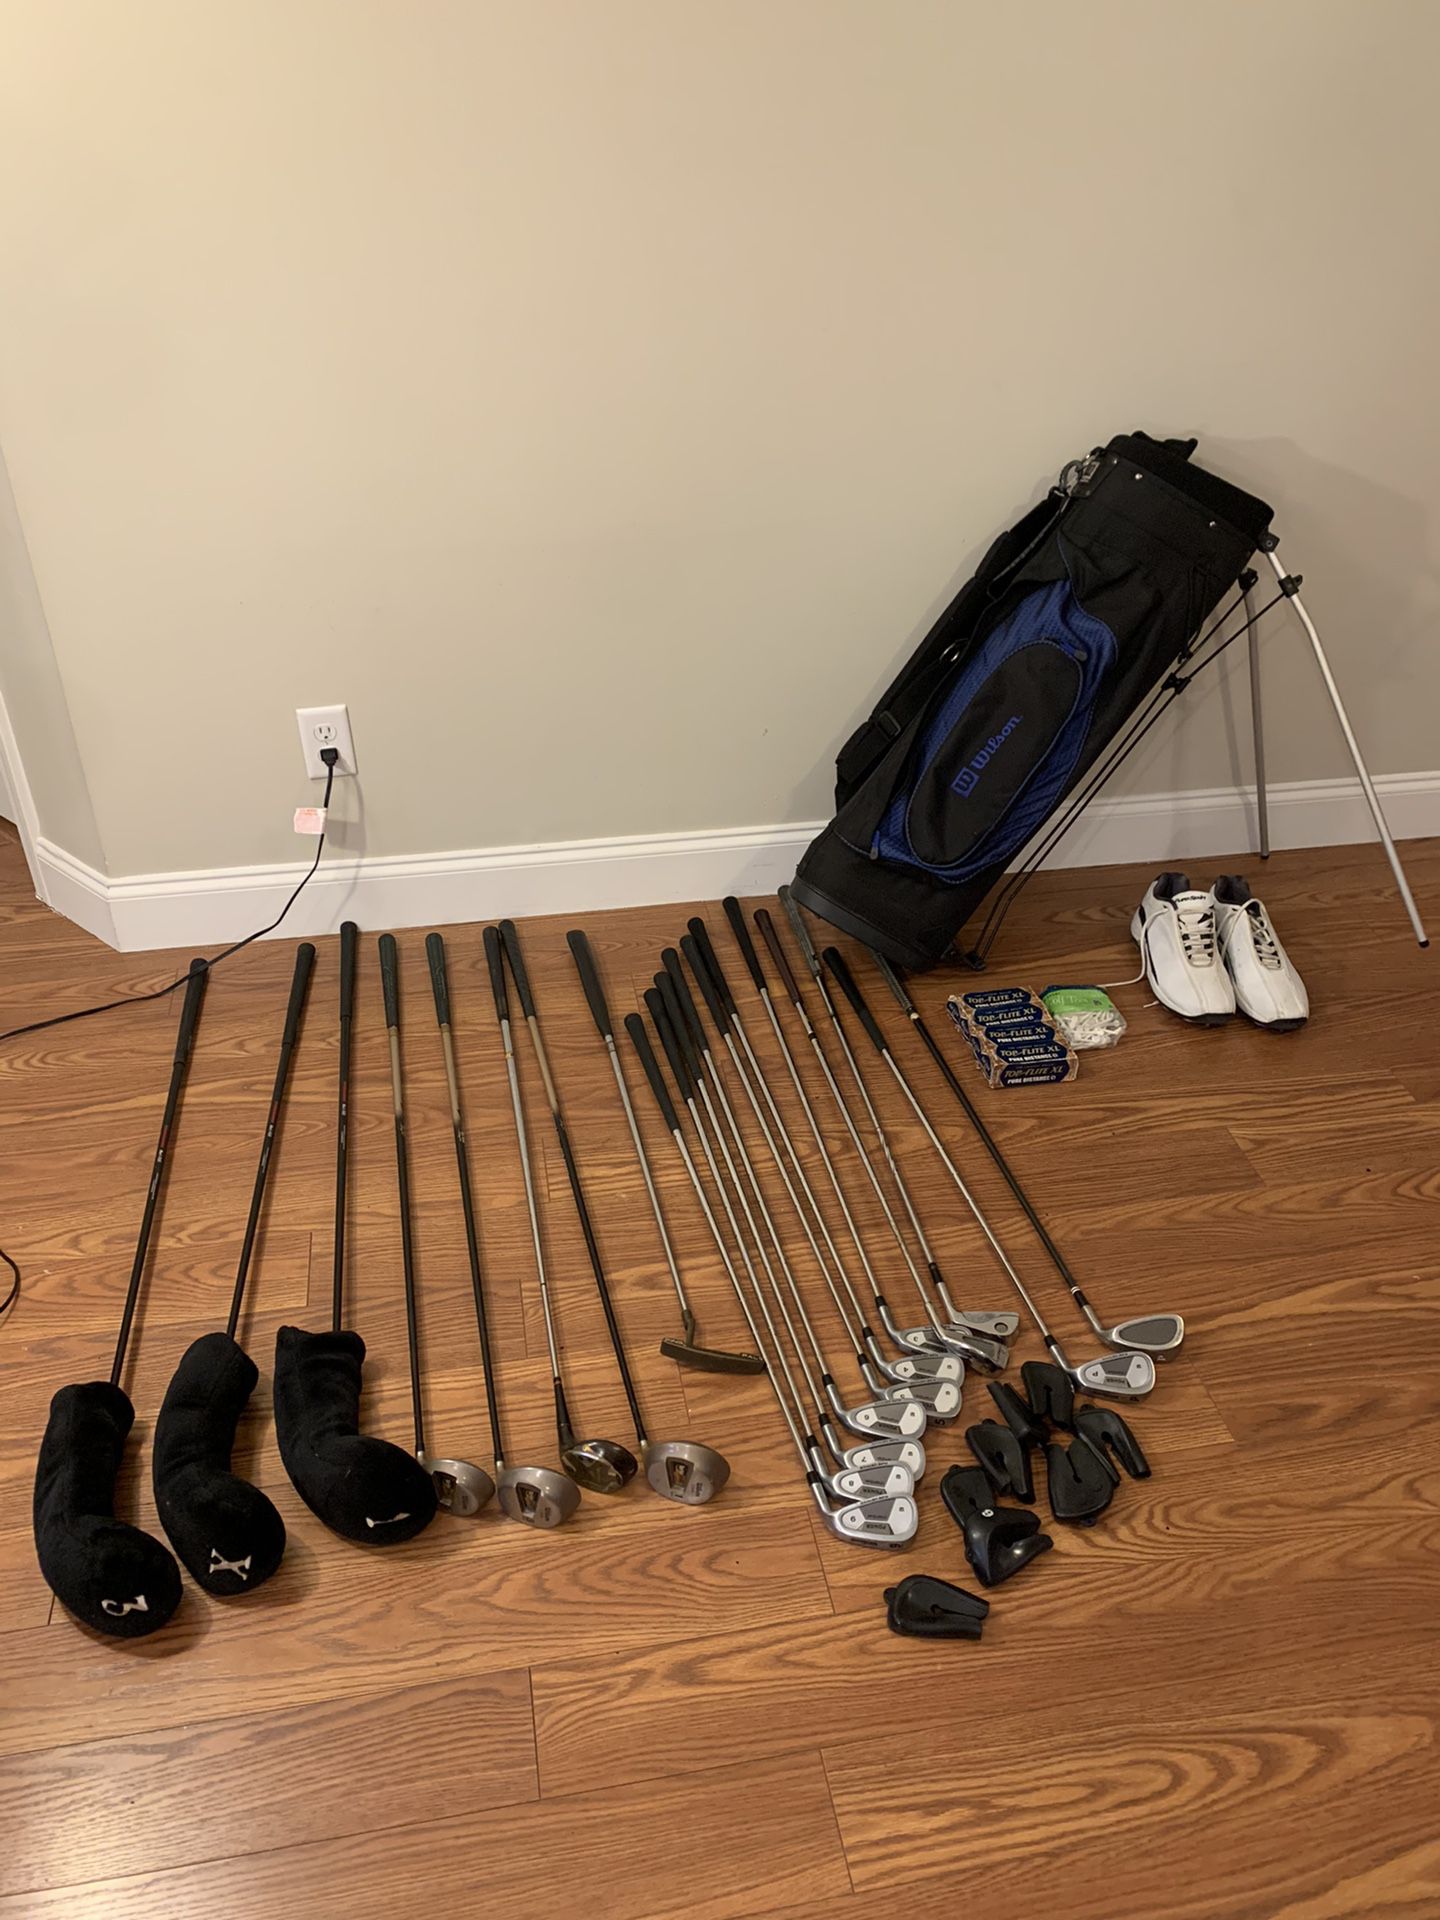 Vintage Wilson 19 golf clubs, bag, shoes, and golf balls.